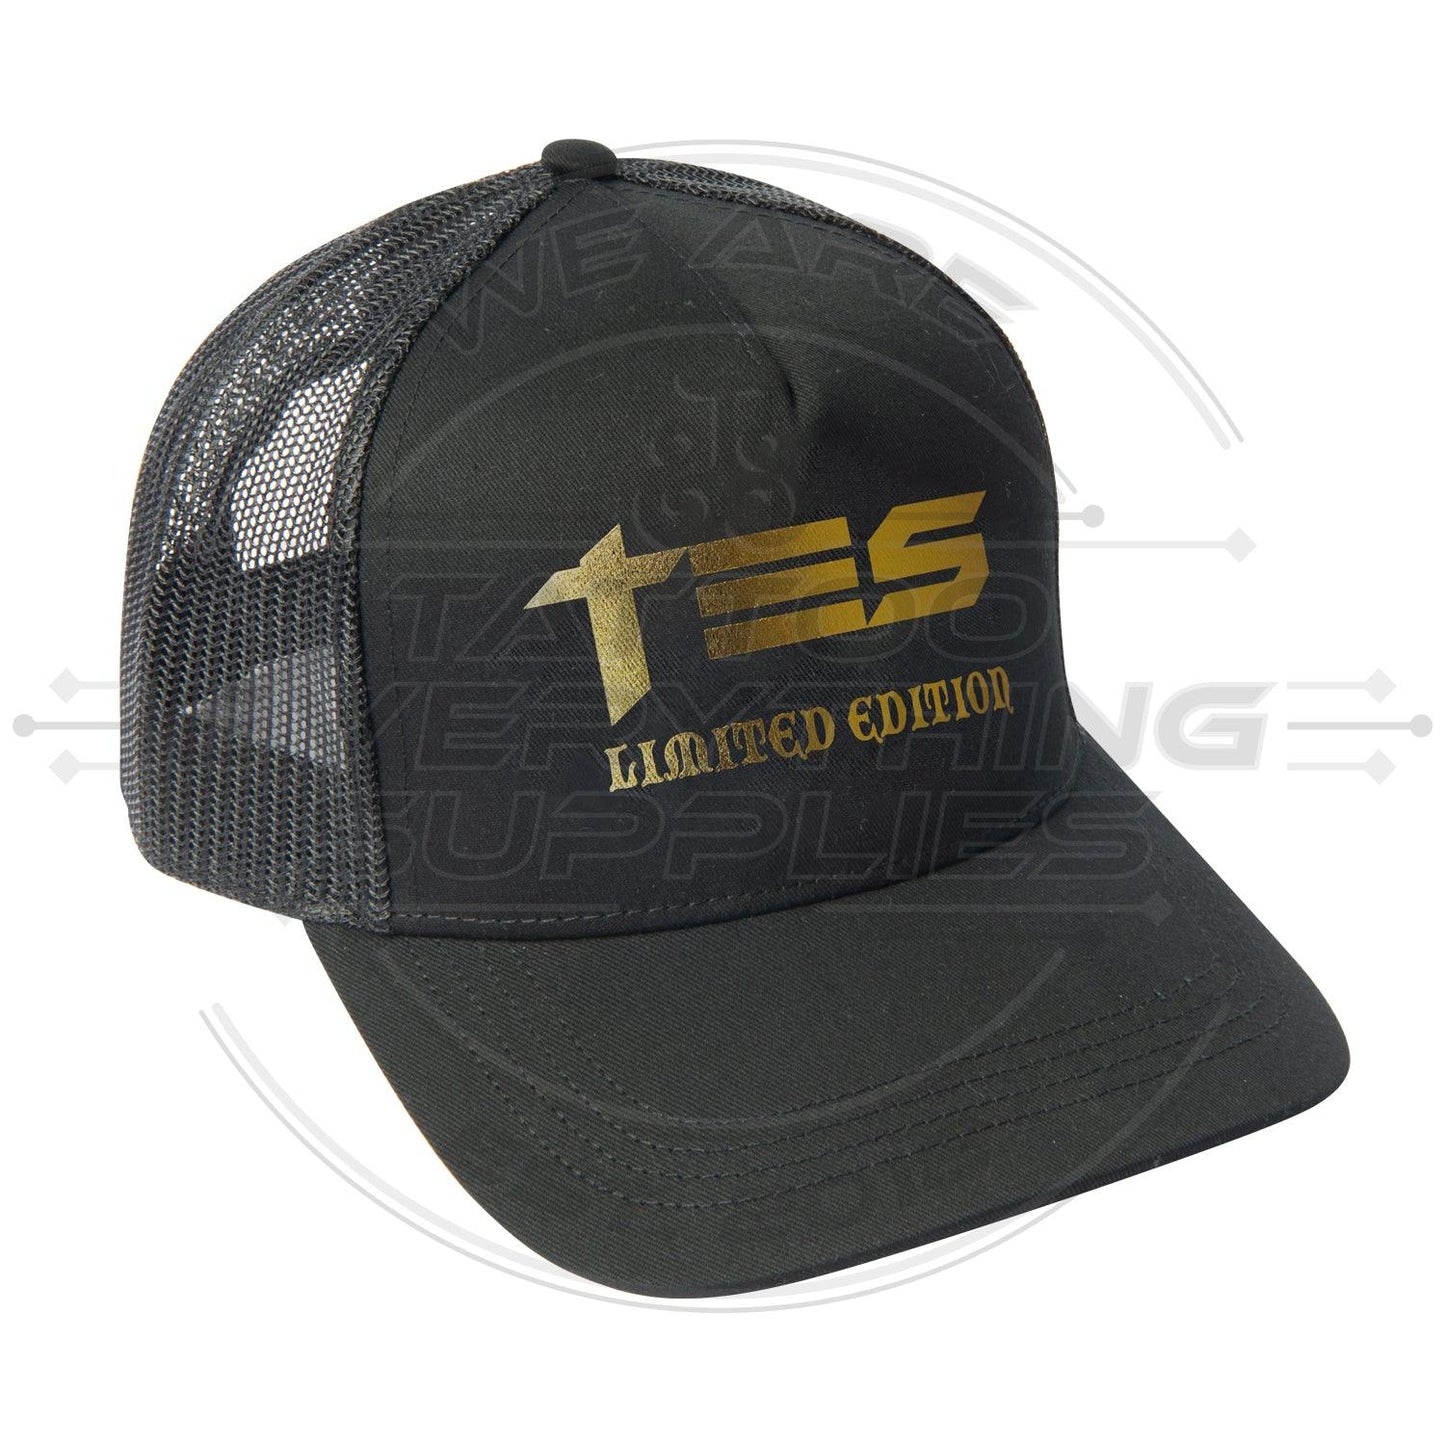 Limited Edition Retro Tes-Tattoo Everything Trucker Cap Black/Gold - Tattoo Everything Supplies